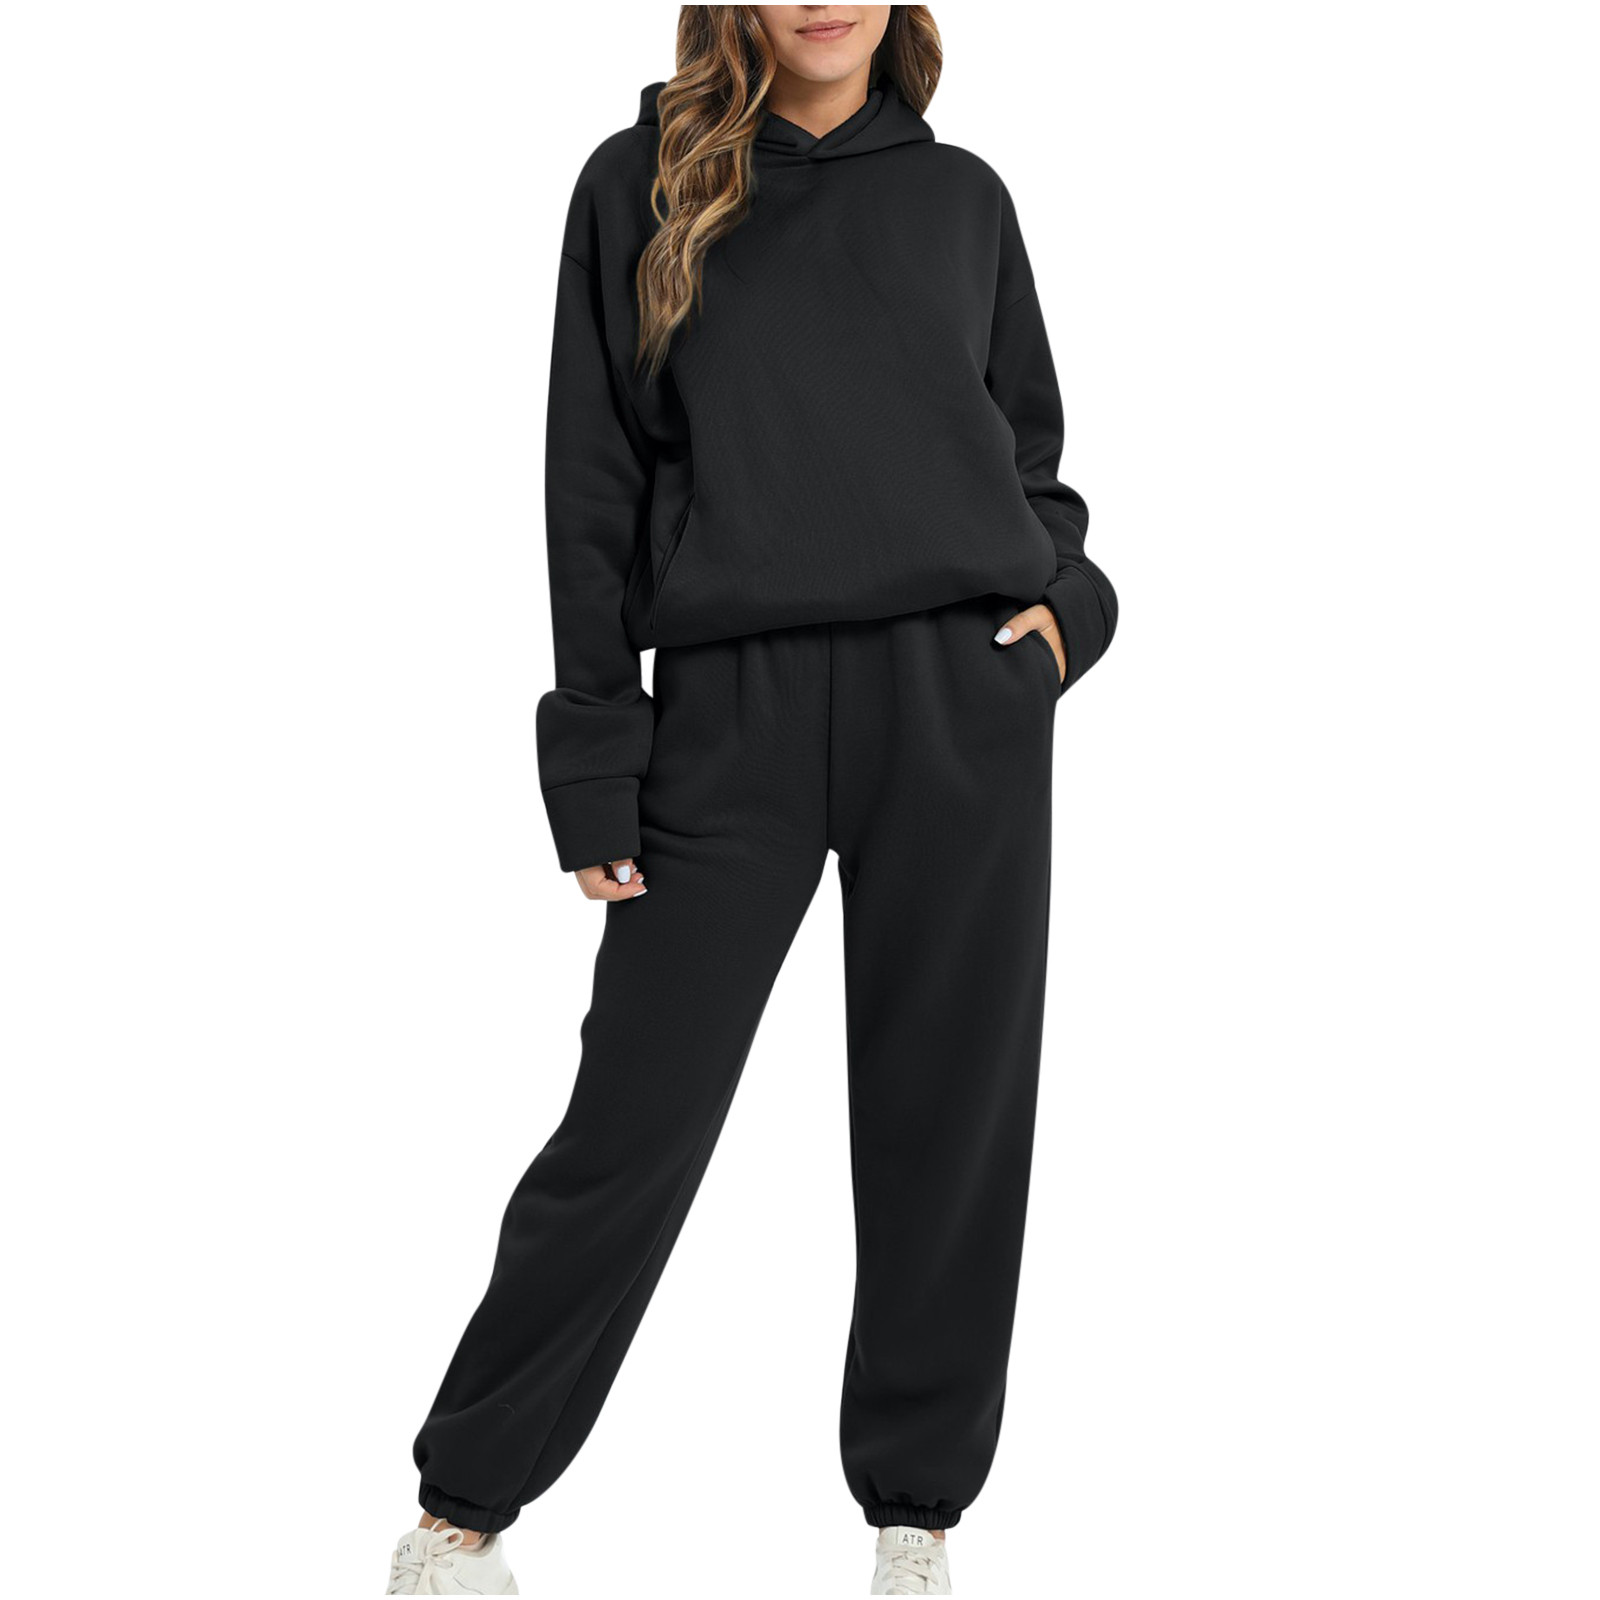 Sweatsuits for Women Set 3 Piece, Womens Hoodies and Sweatpants Sports ...